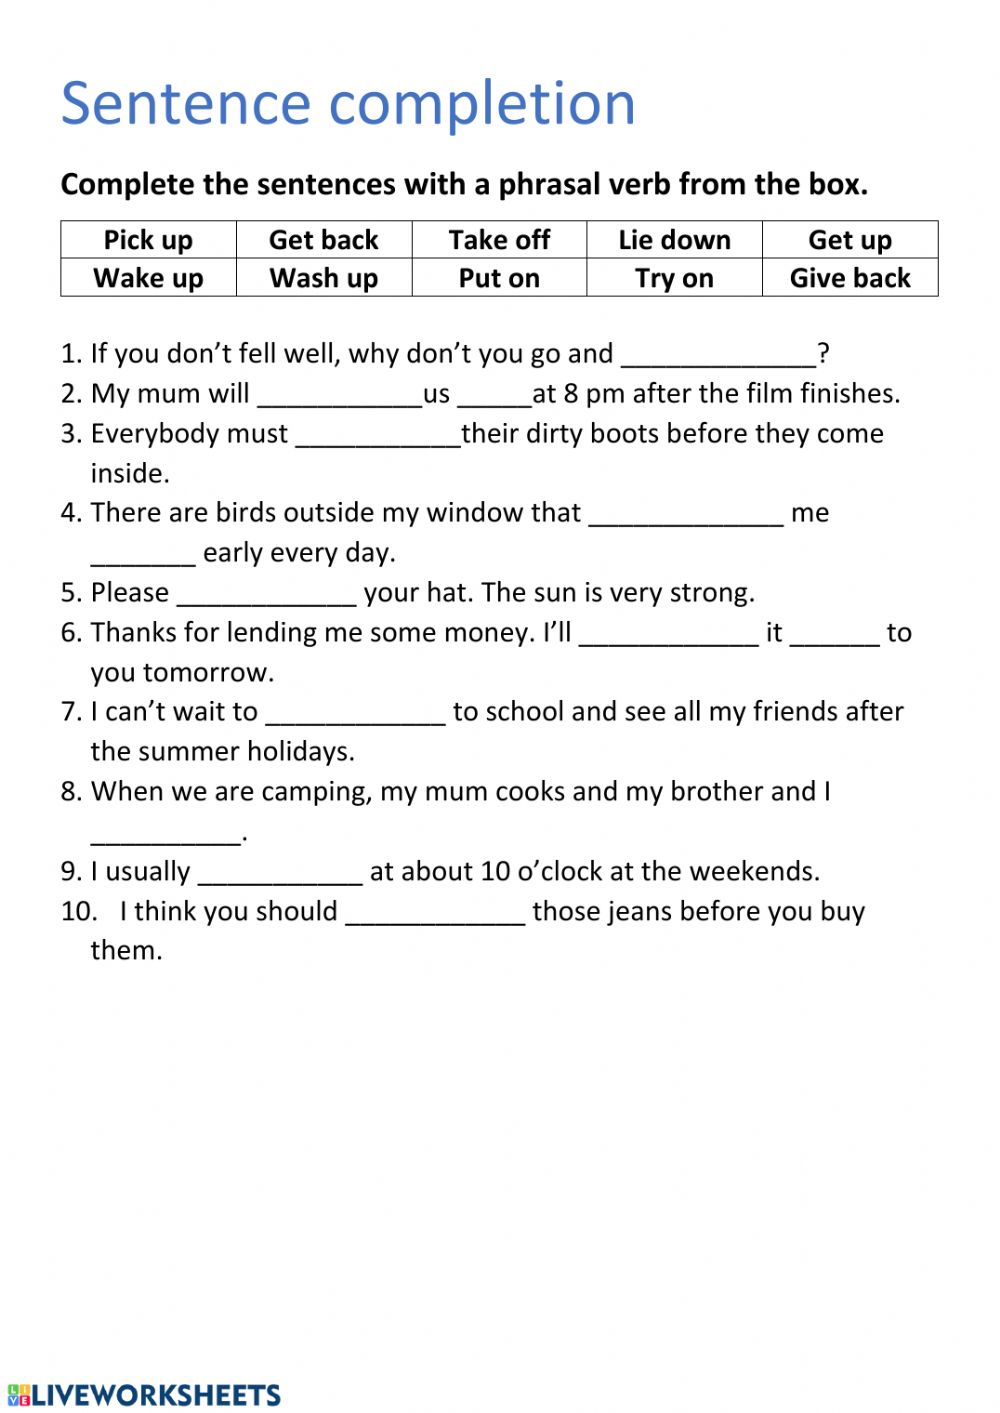 Sentence Completion P3 Interactive Worksheet